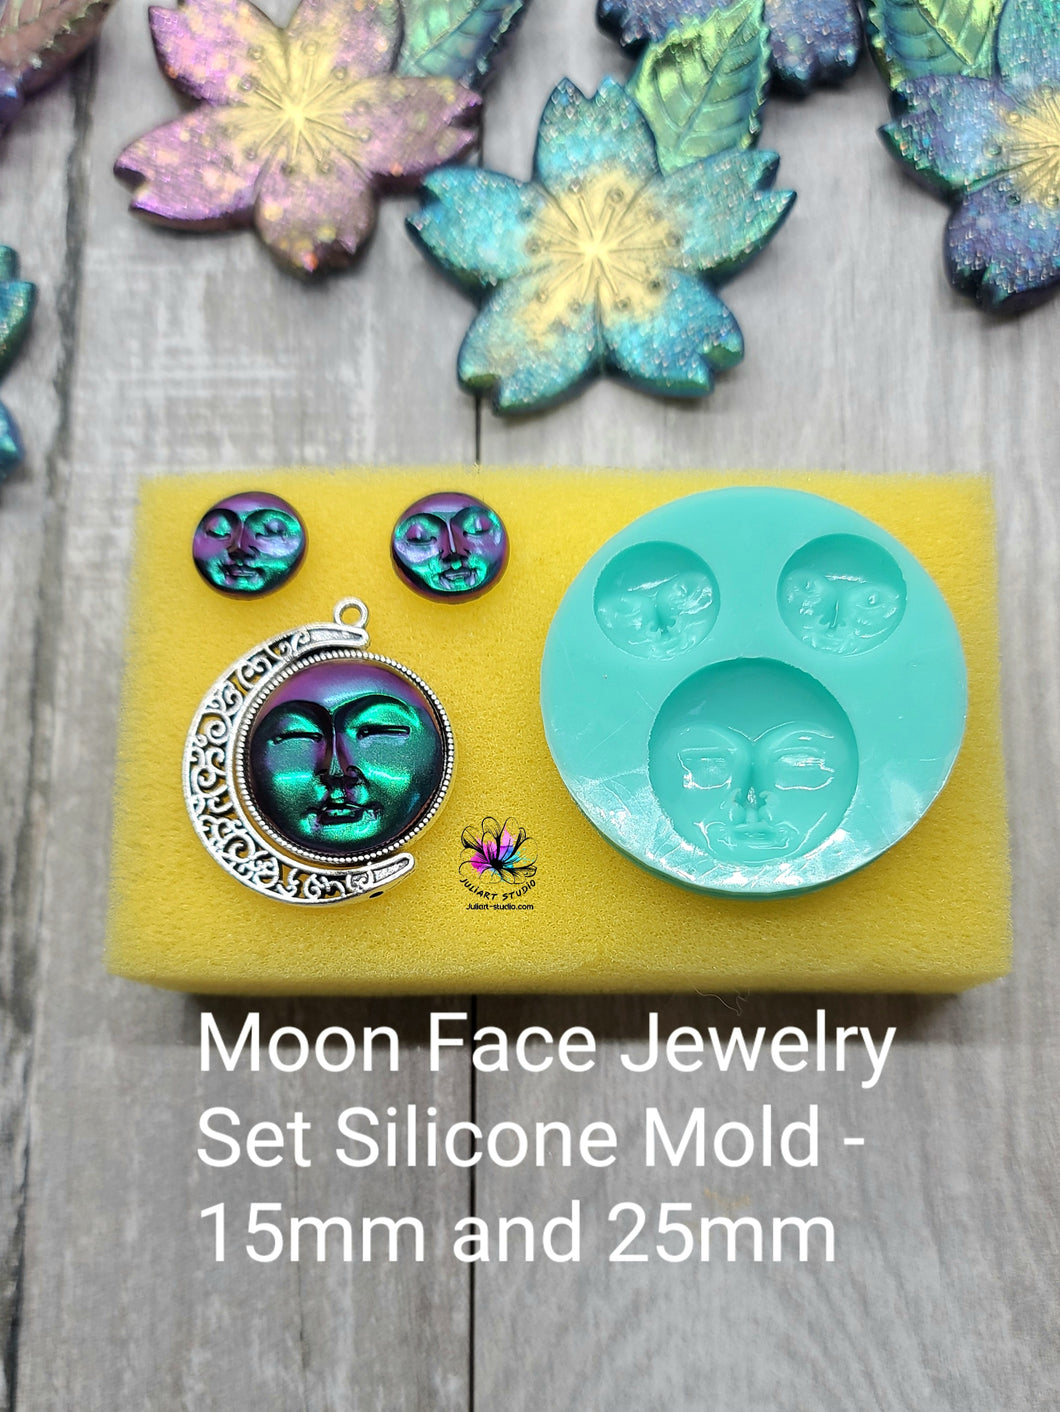 Moon Face Jewelry Set Silicone Mold for Resin casting - 15mm and 25mm